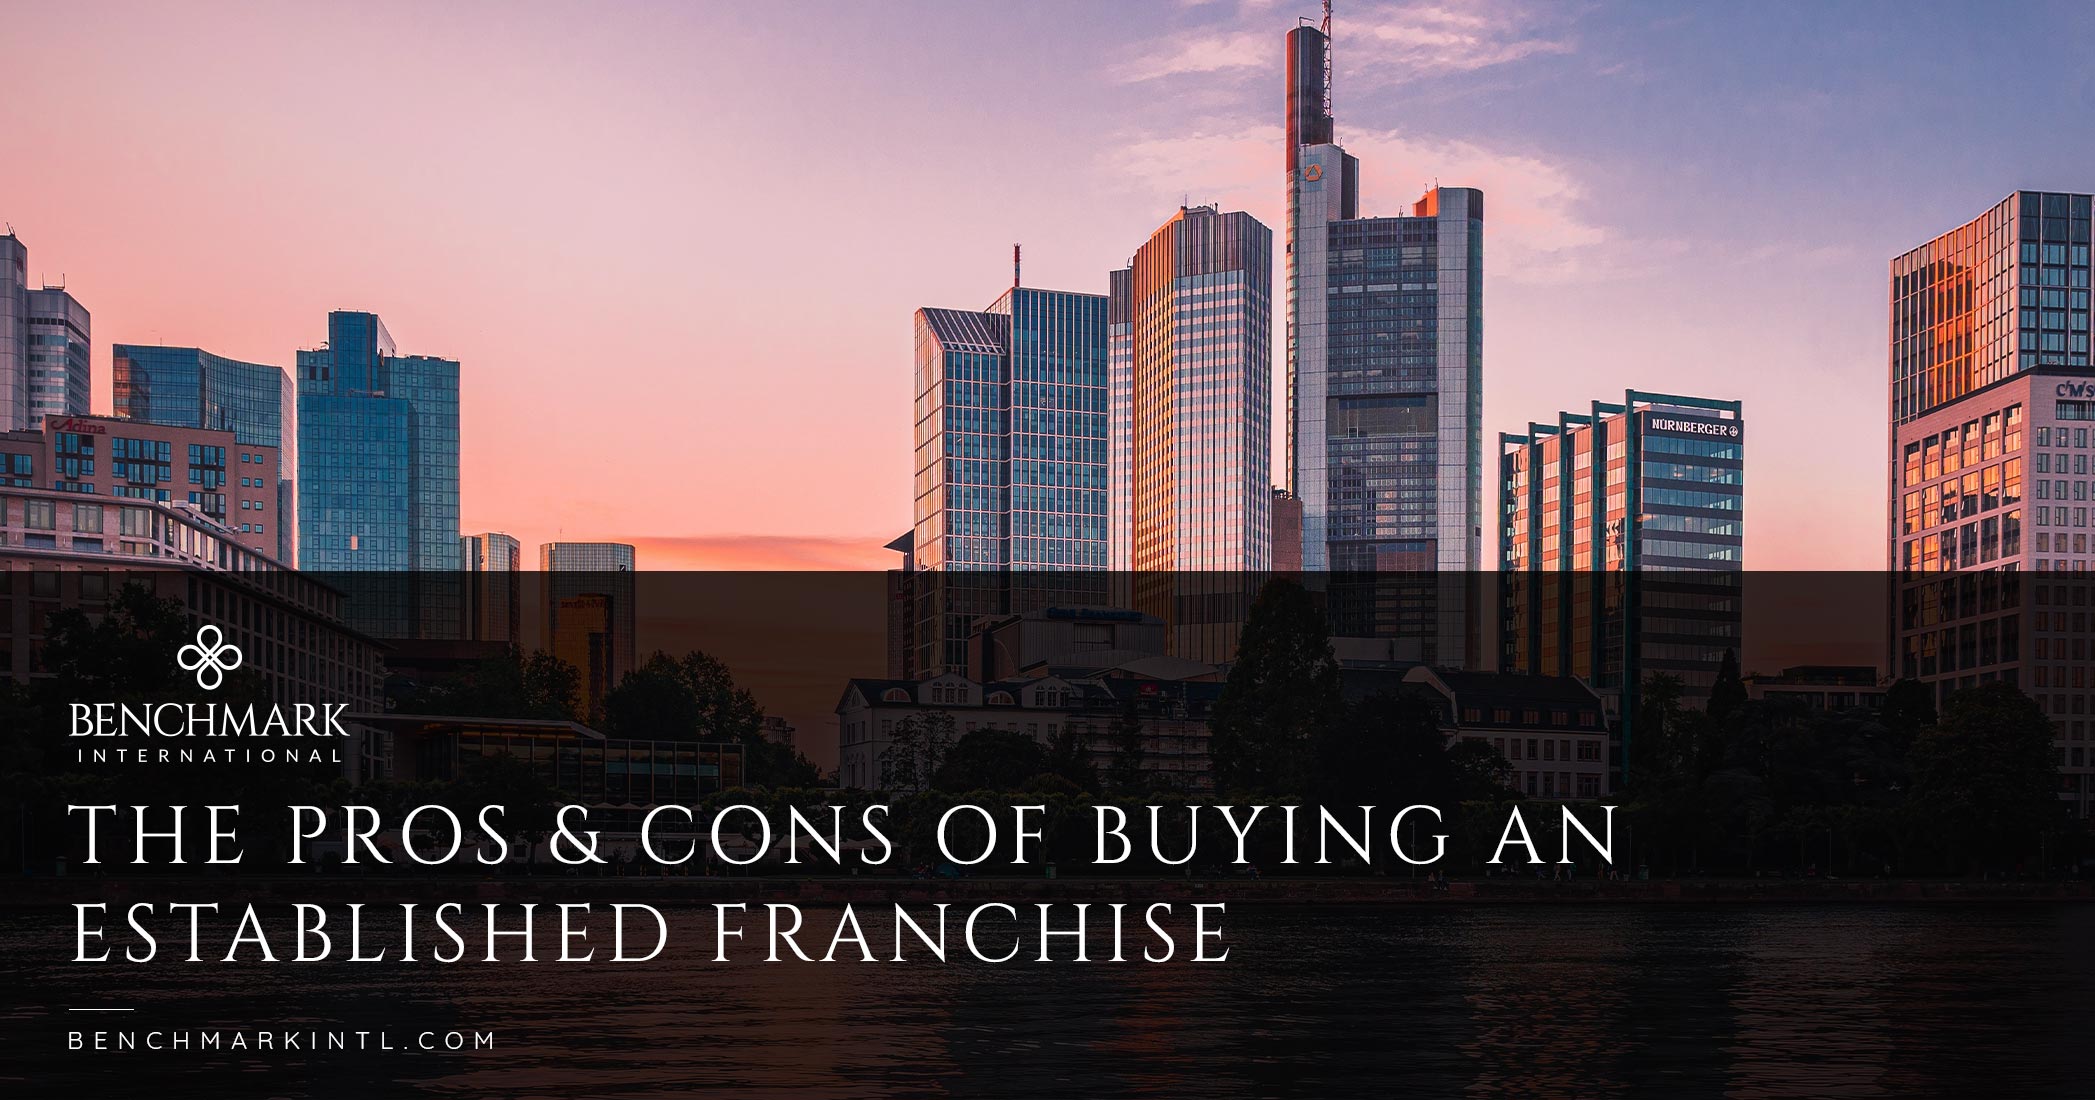 The Pros & Cons Of Buying An Established Franchise